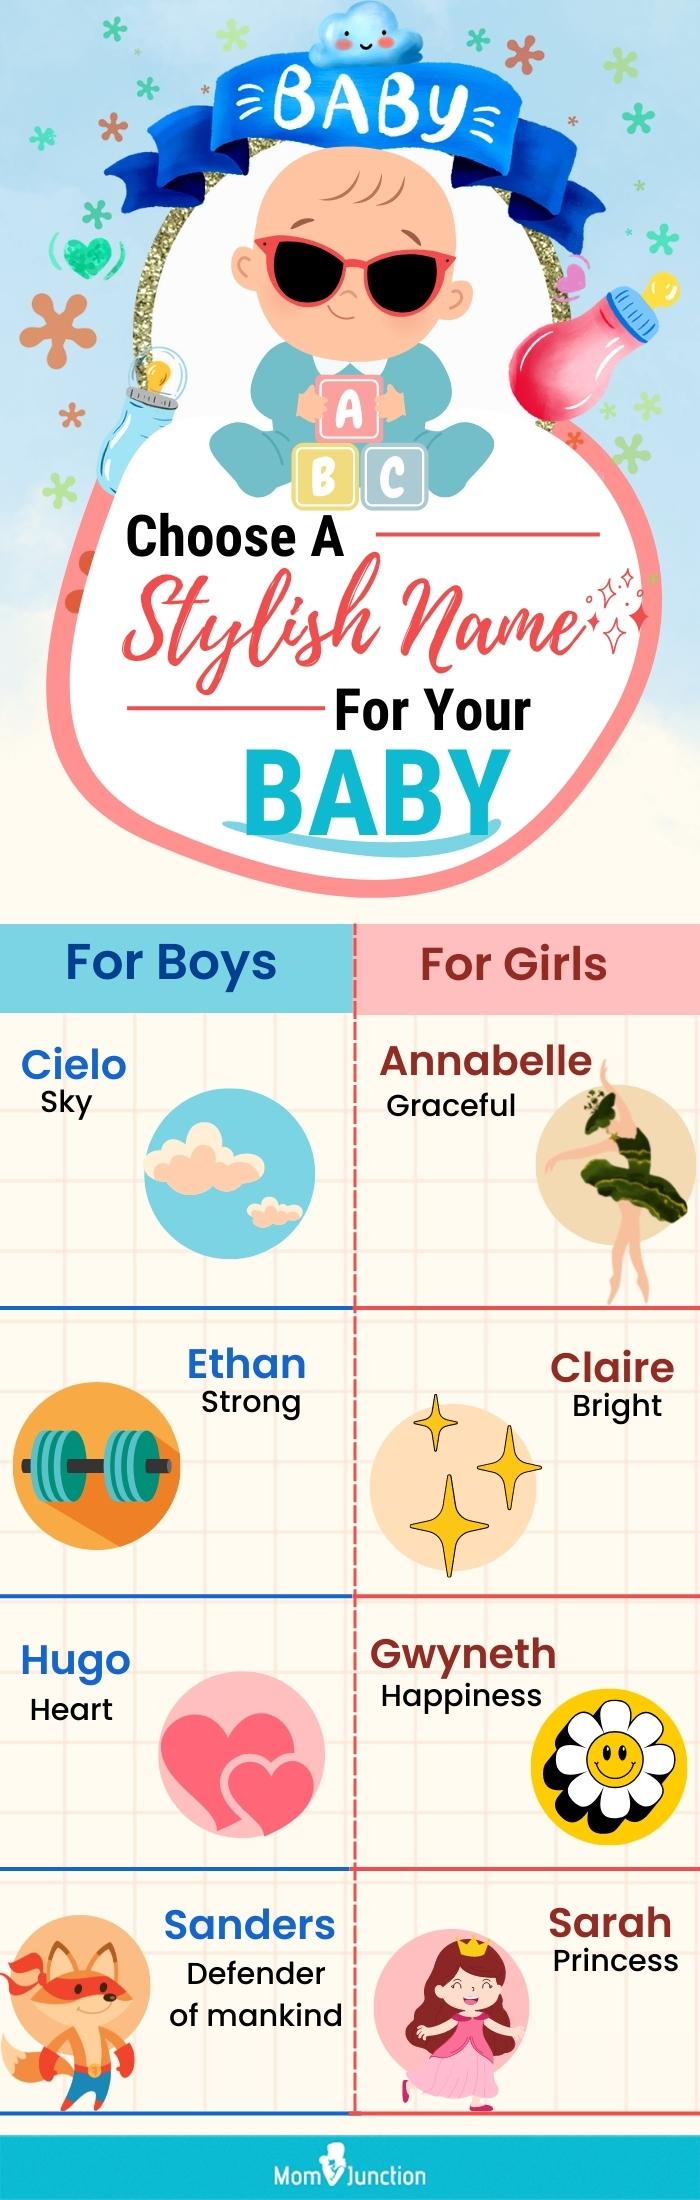 Baby girl names inspired by world's most intelligent women